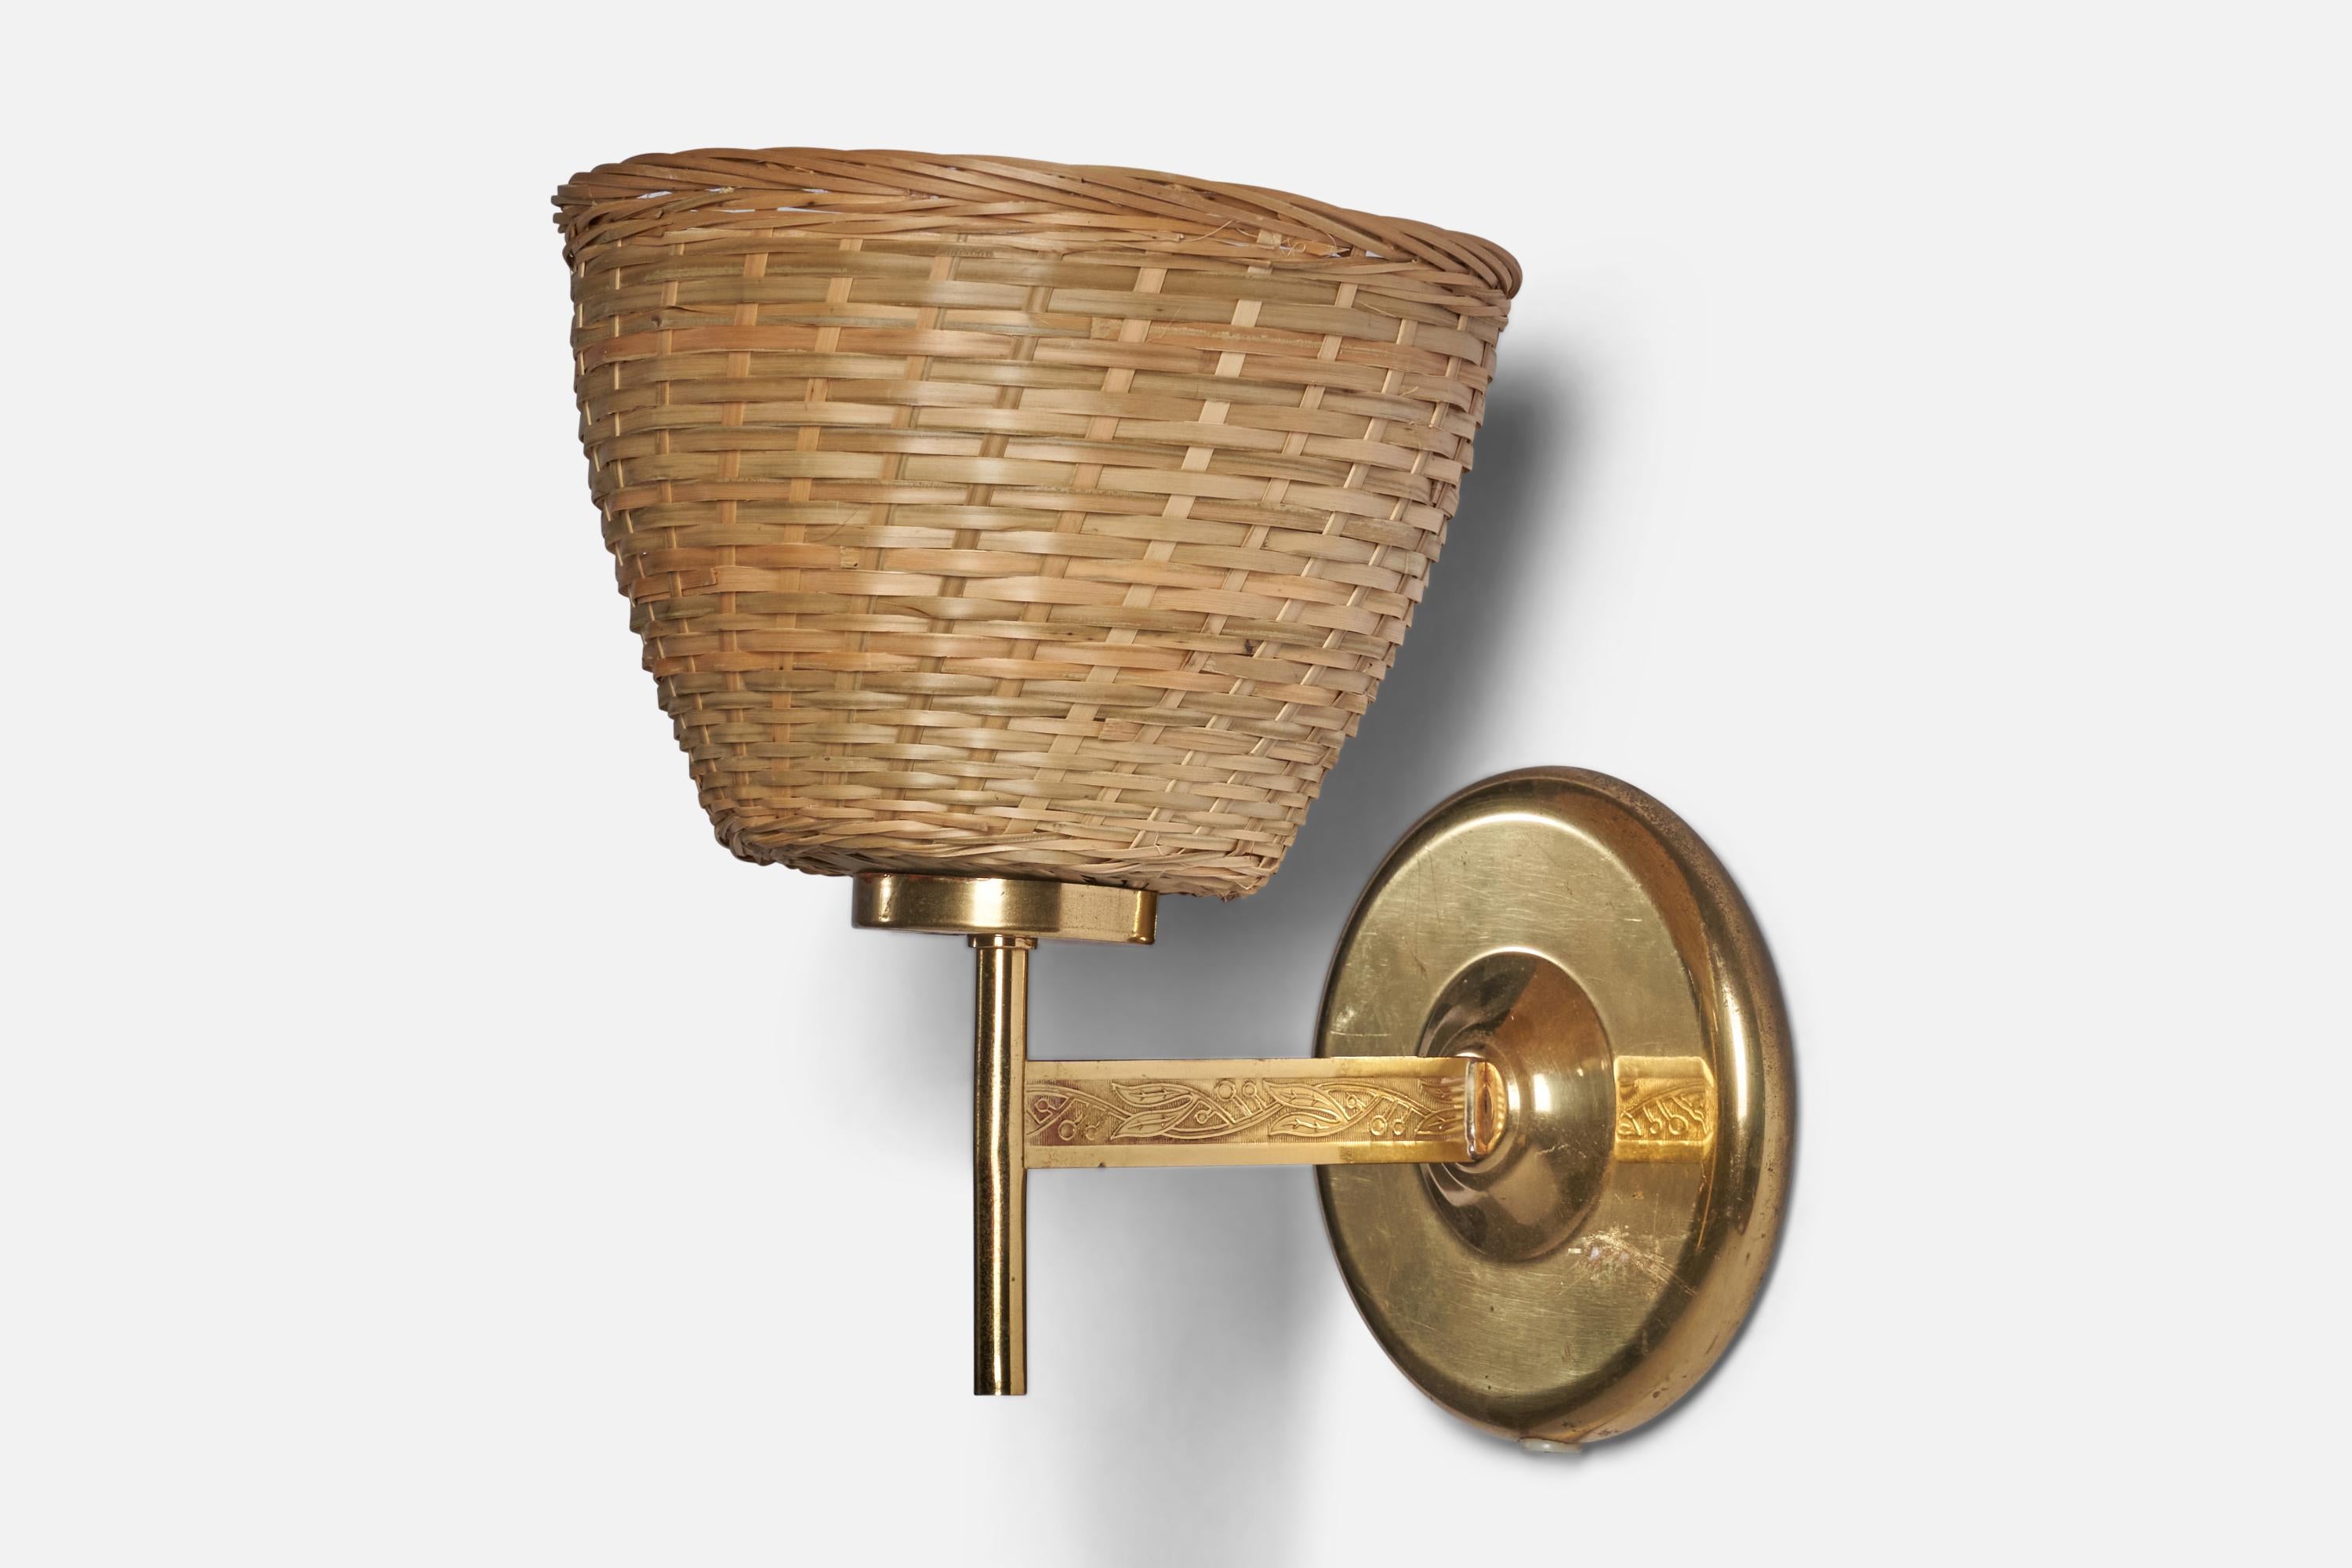 A brass and rattan wall light designed and produced in Sweden, 1950s.

Overall Dimensions (inches): 9” H x 7” W x 9” D
Back Plate Dimensions (inches): 5” Diameter
Bulb Specifications: E-26 Bulb
Number of Sockets: 1
All lighting will be converted for